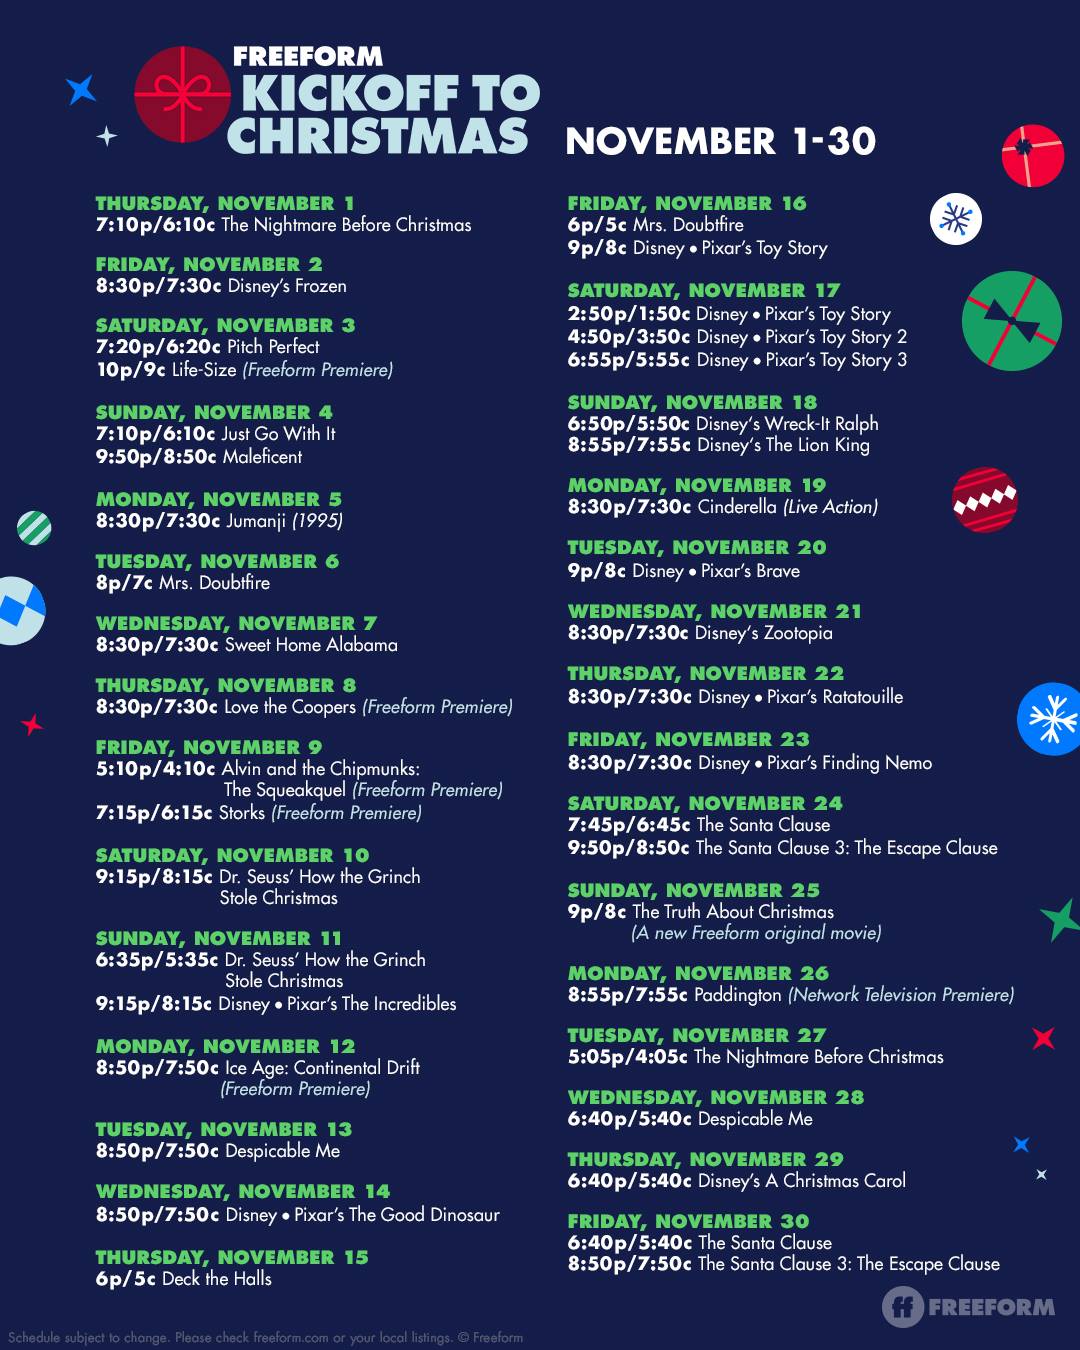 Freeform 2018 Kickoff to Christmas movies – Christmas movie Schedule